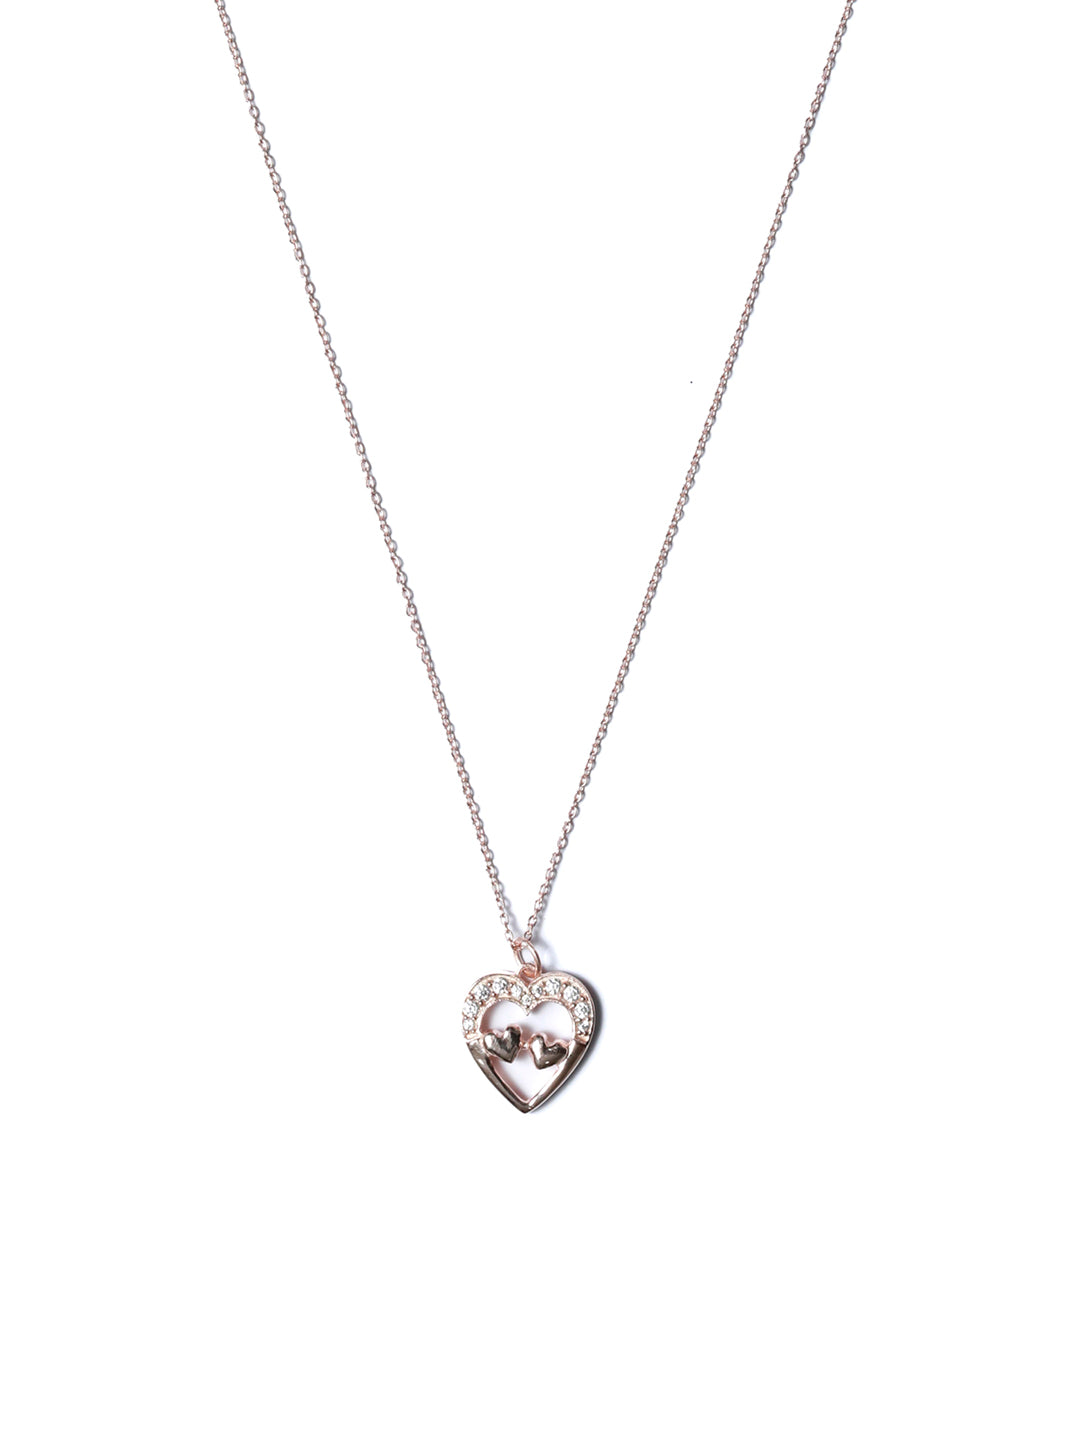 Hearts in Heart Rose Gold Sterling Silver Necklace